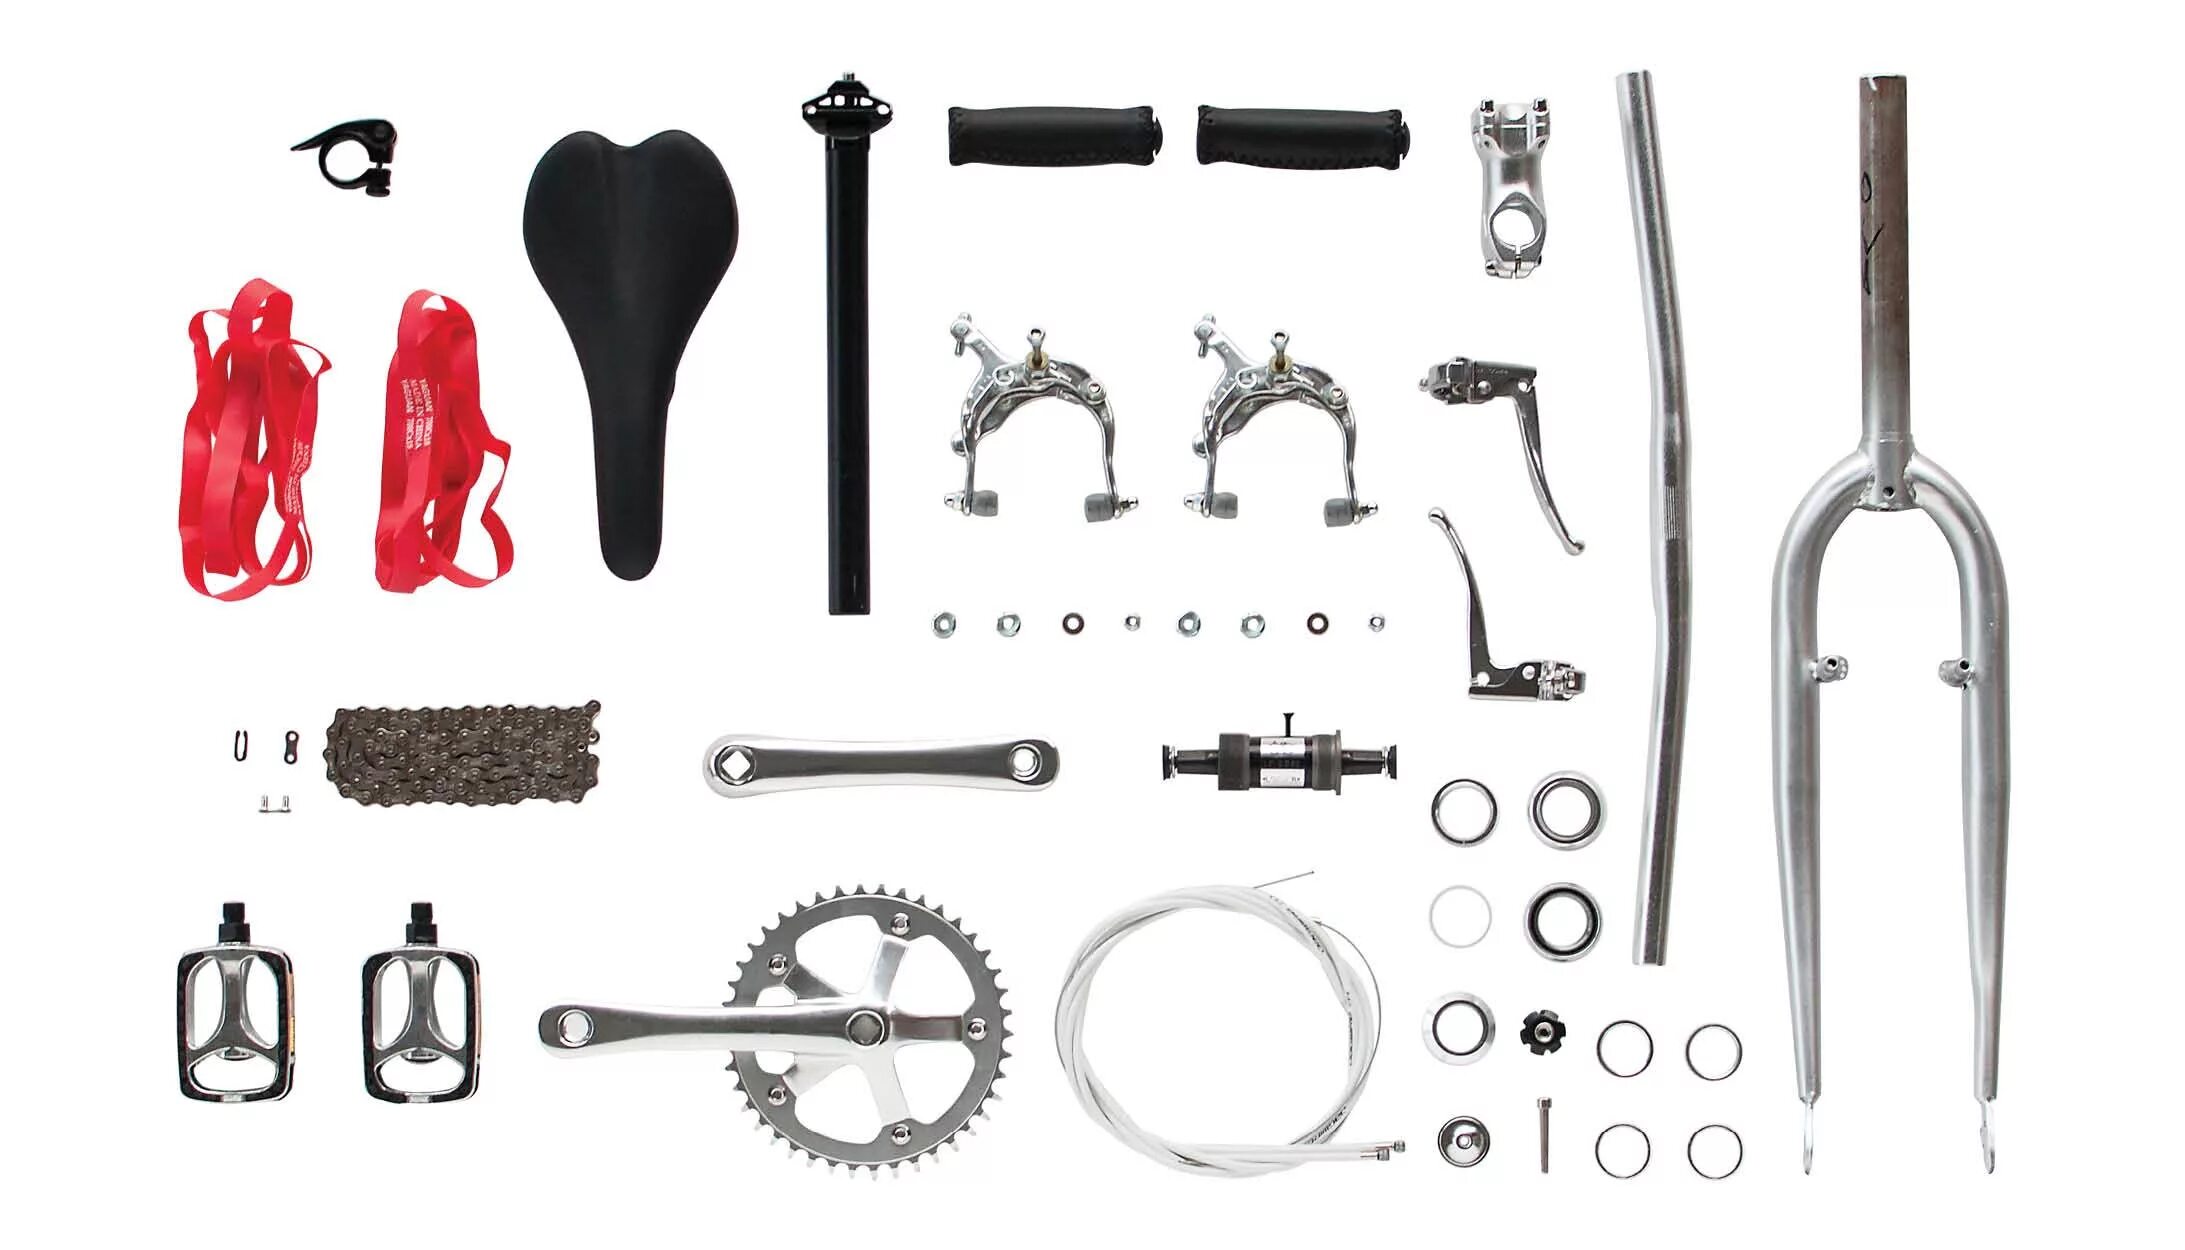 Bike parts. Part of Bicycle. Ecobike запчасти. Bicycle Parts for Kids. Bicycle Parts in English.